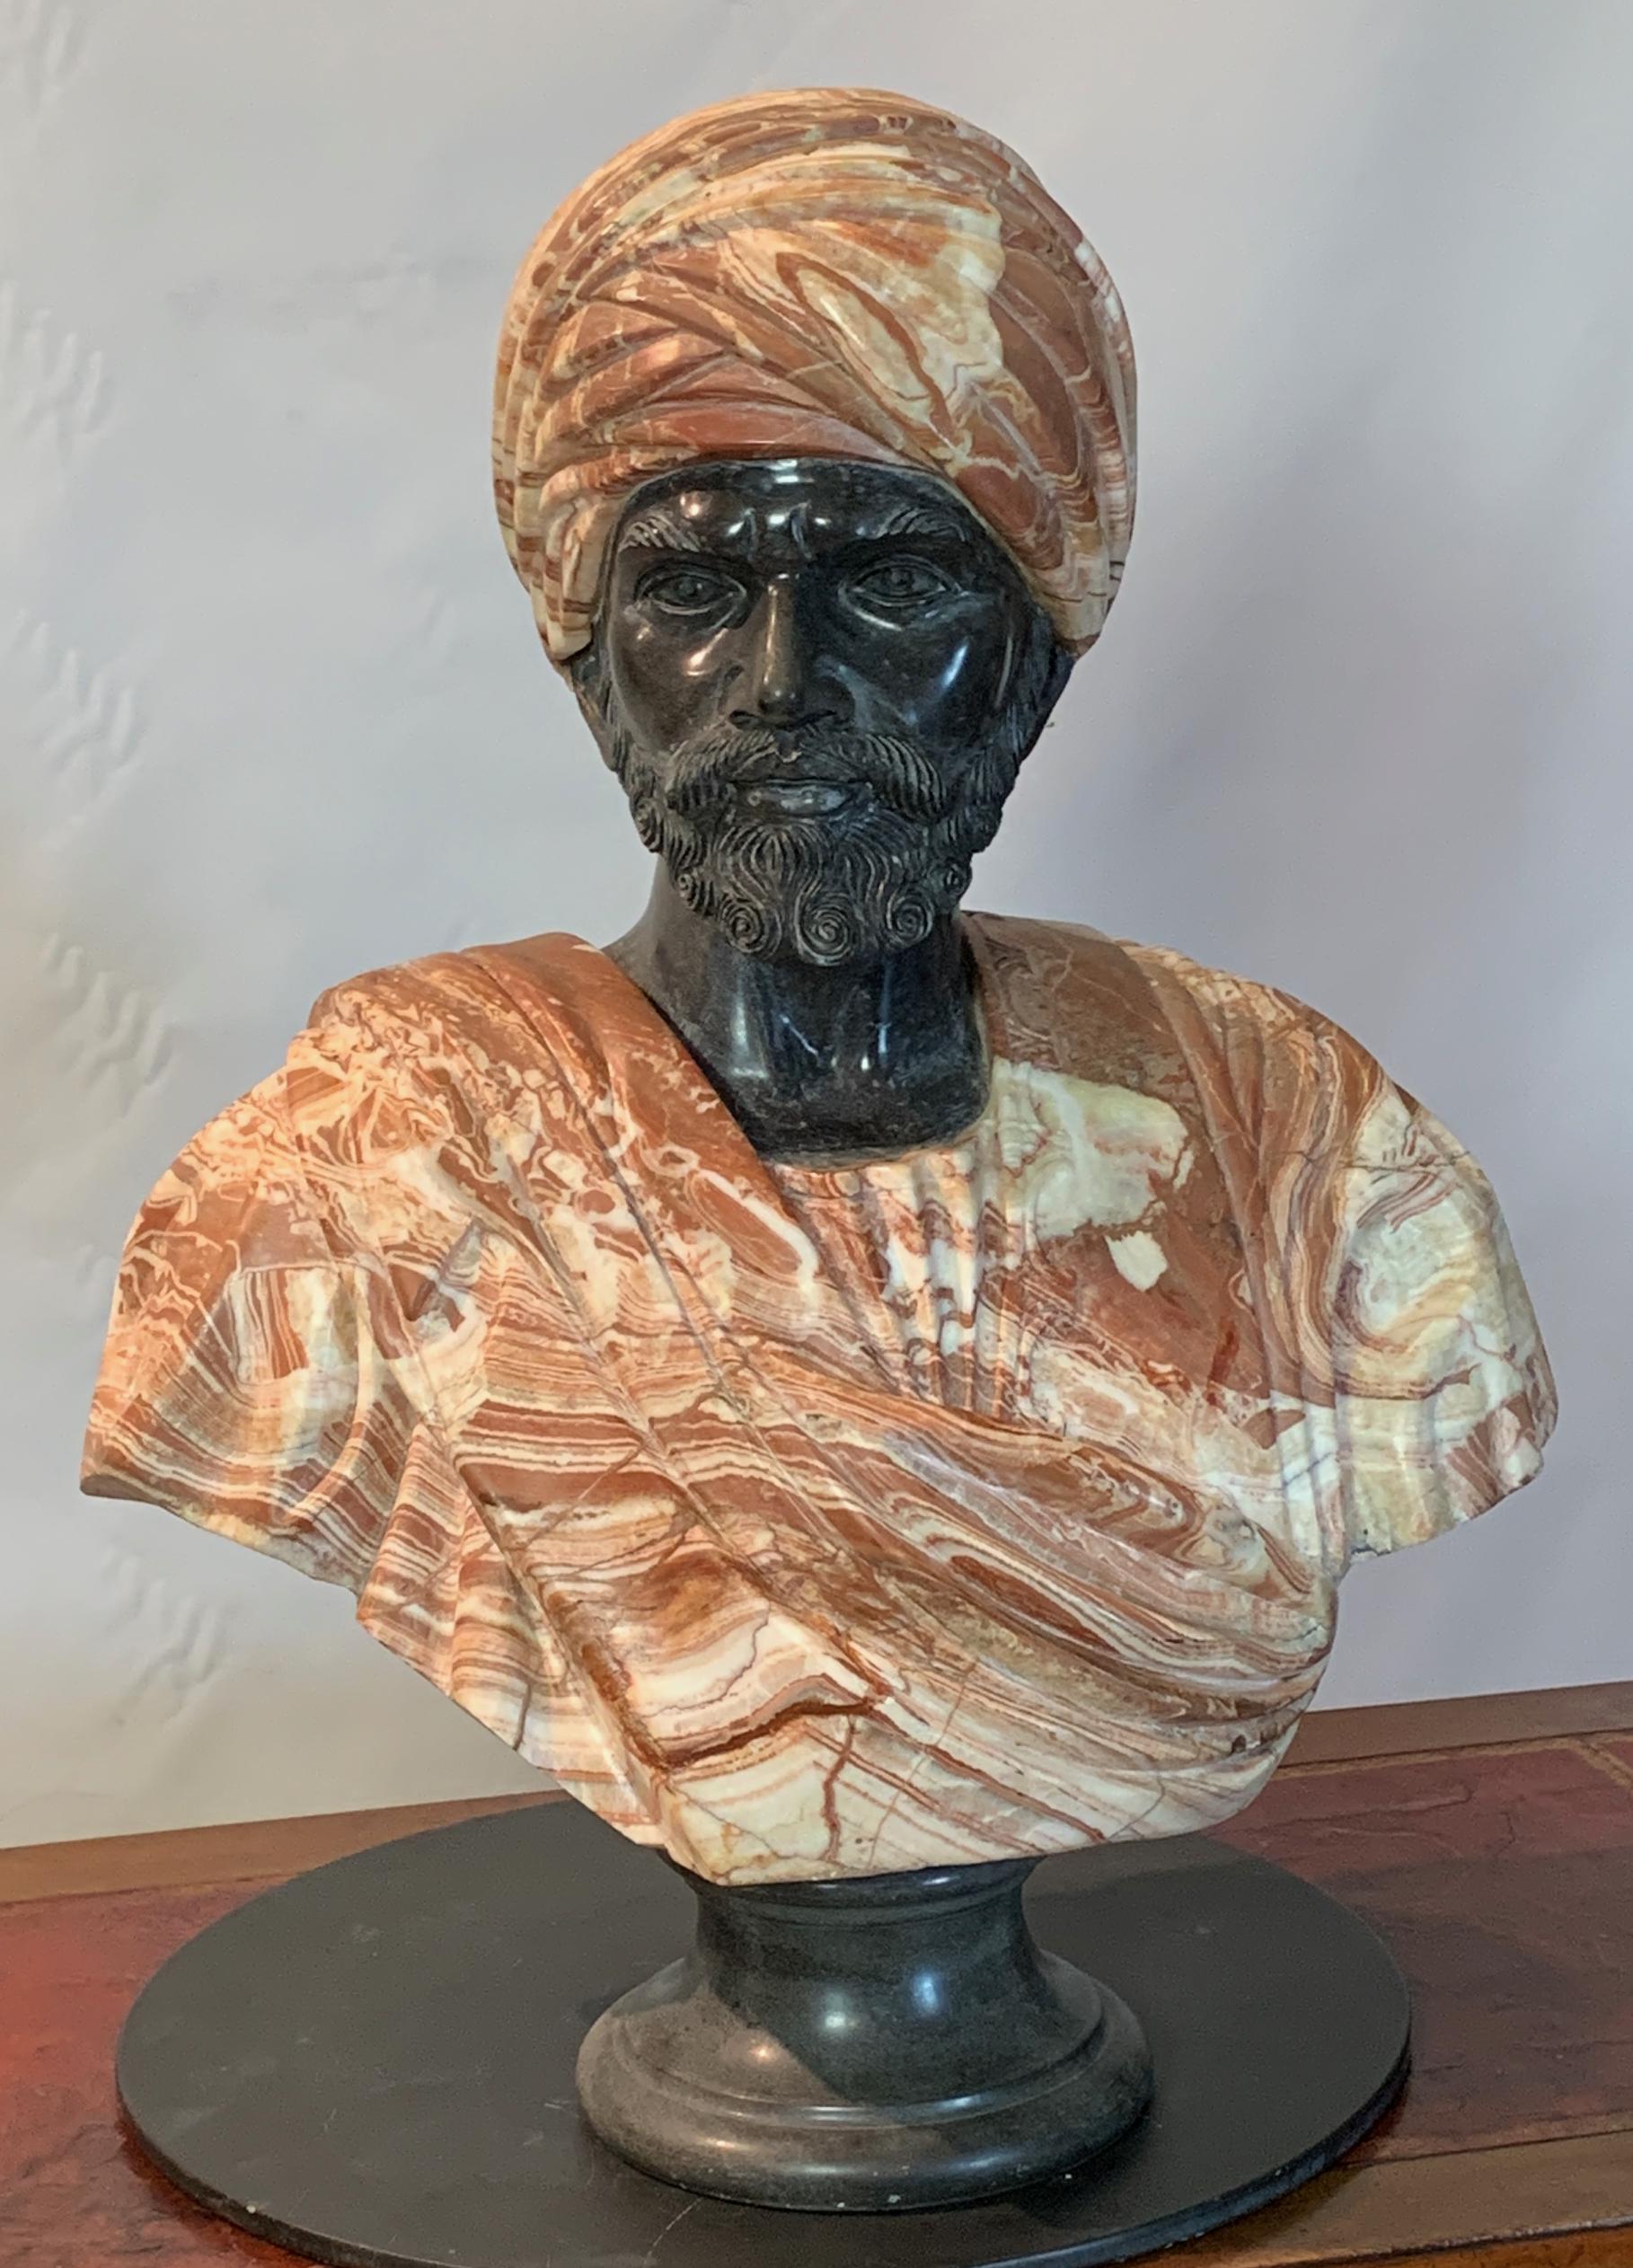 A life-sized marble bust of the Arab Sheikh of Cairo after the 1866 original by Charles Cordier finely modeled in rose and dark gray marble.